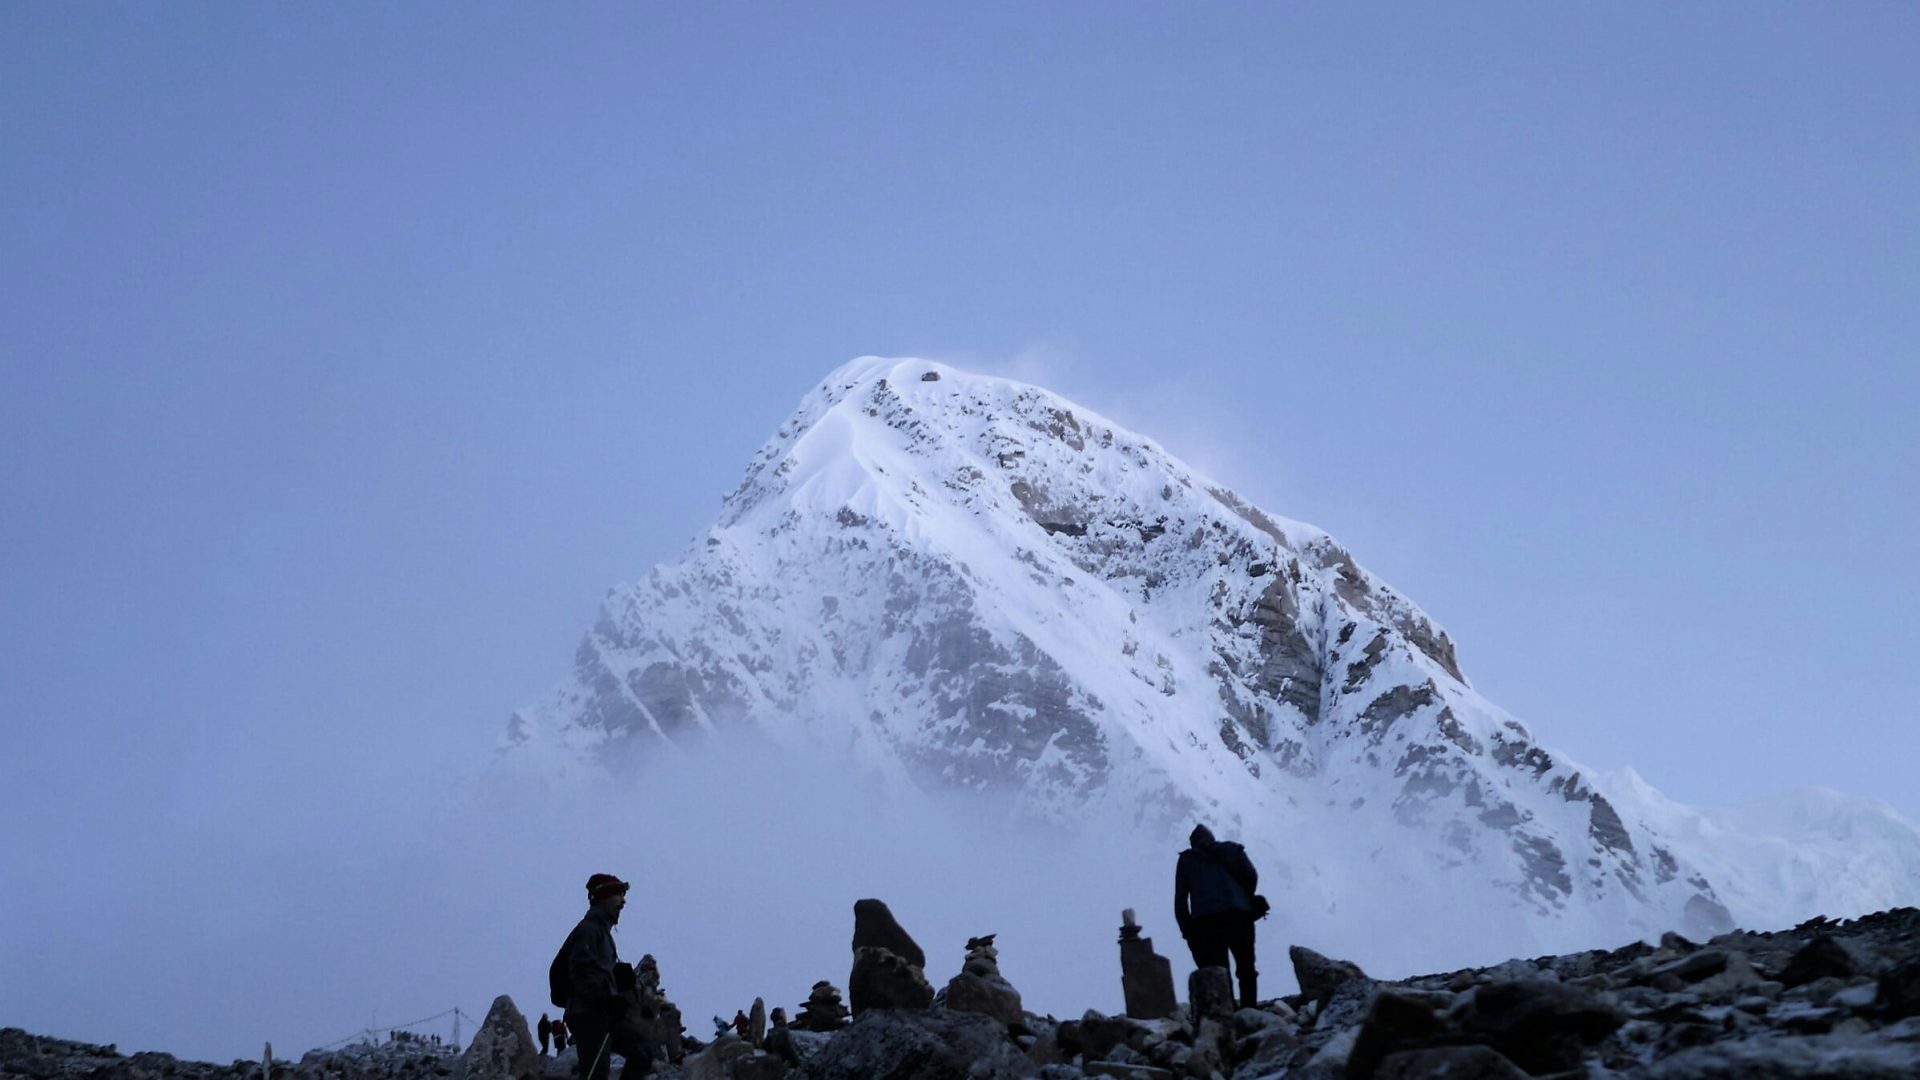 If ‘anyone’ can climb Everest, where does that leave Everest?